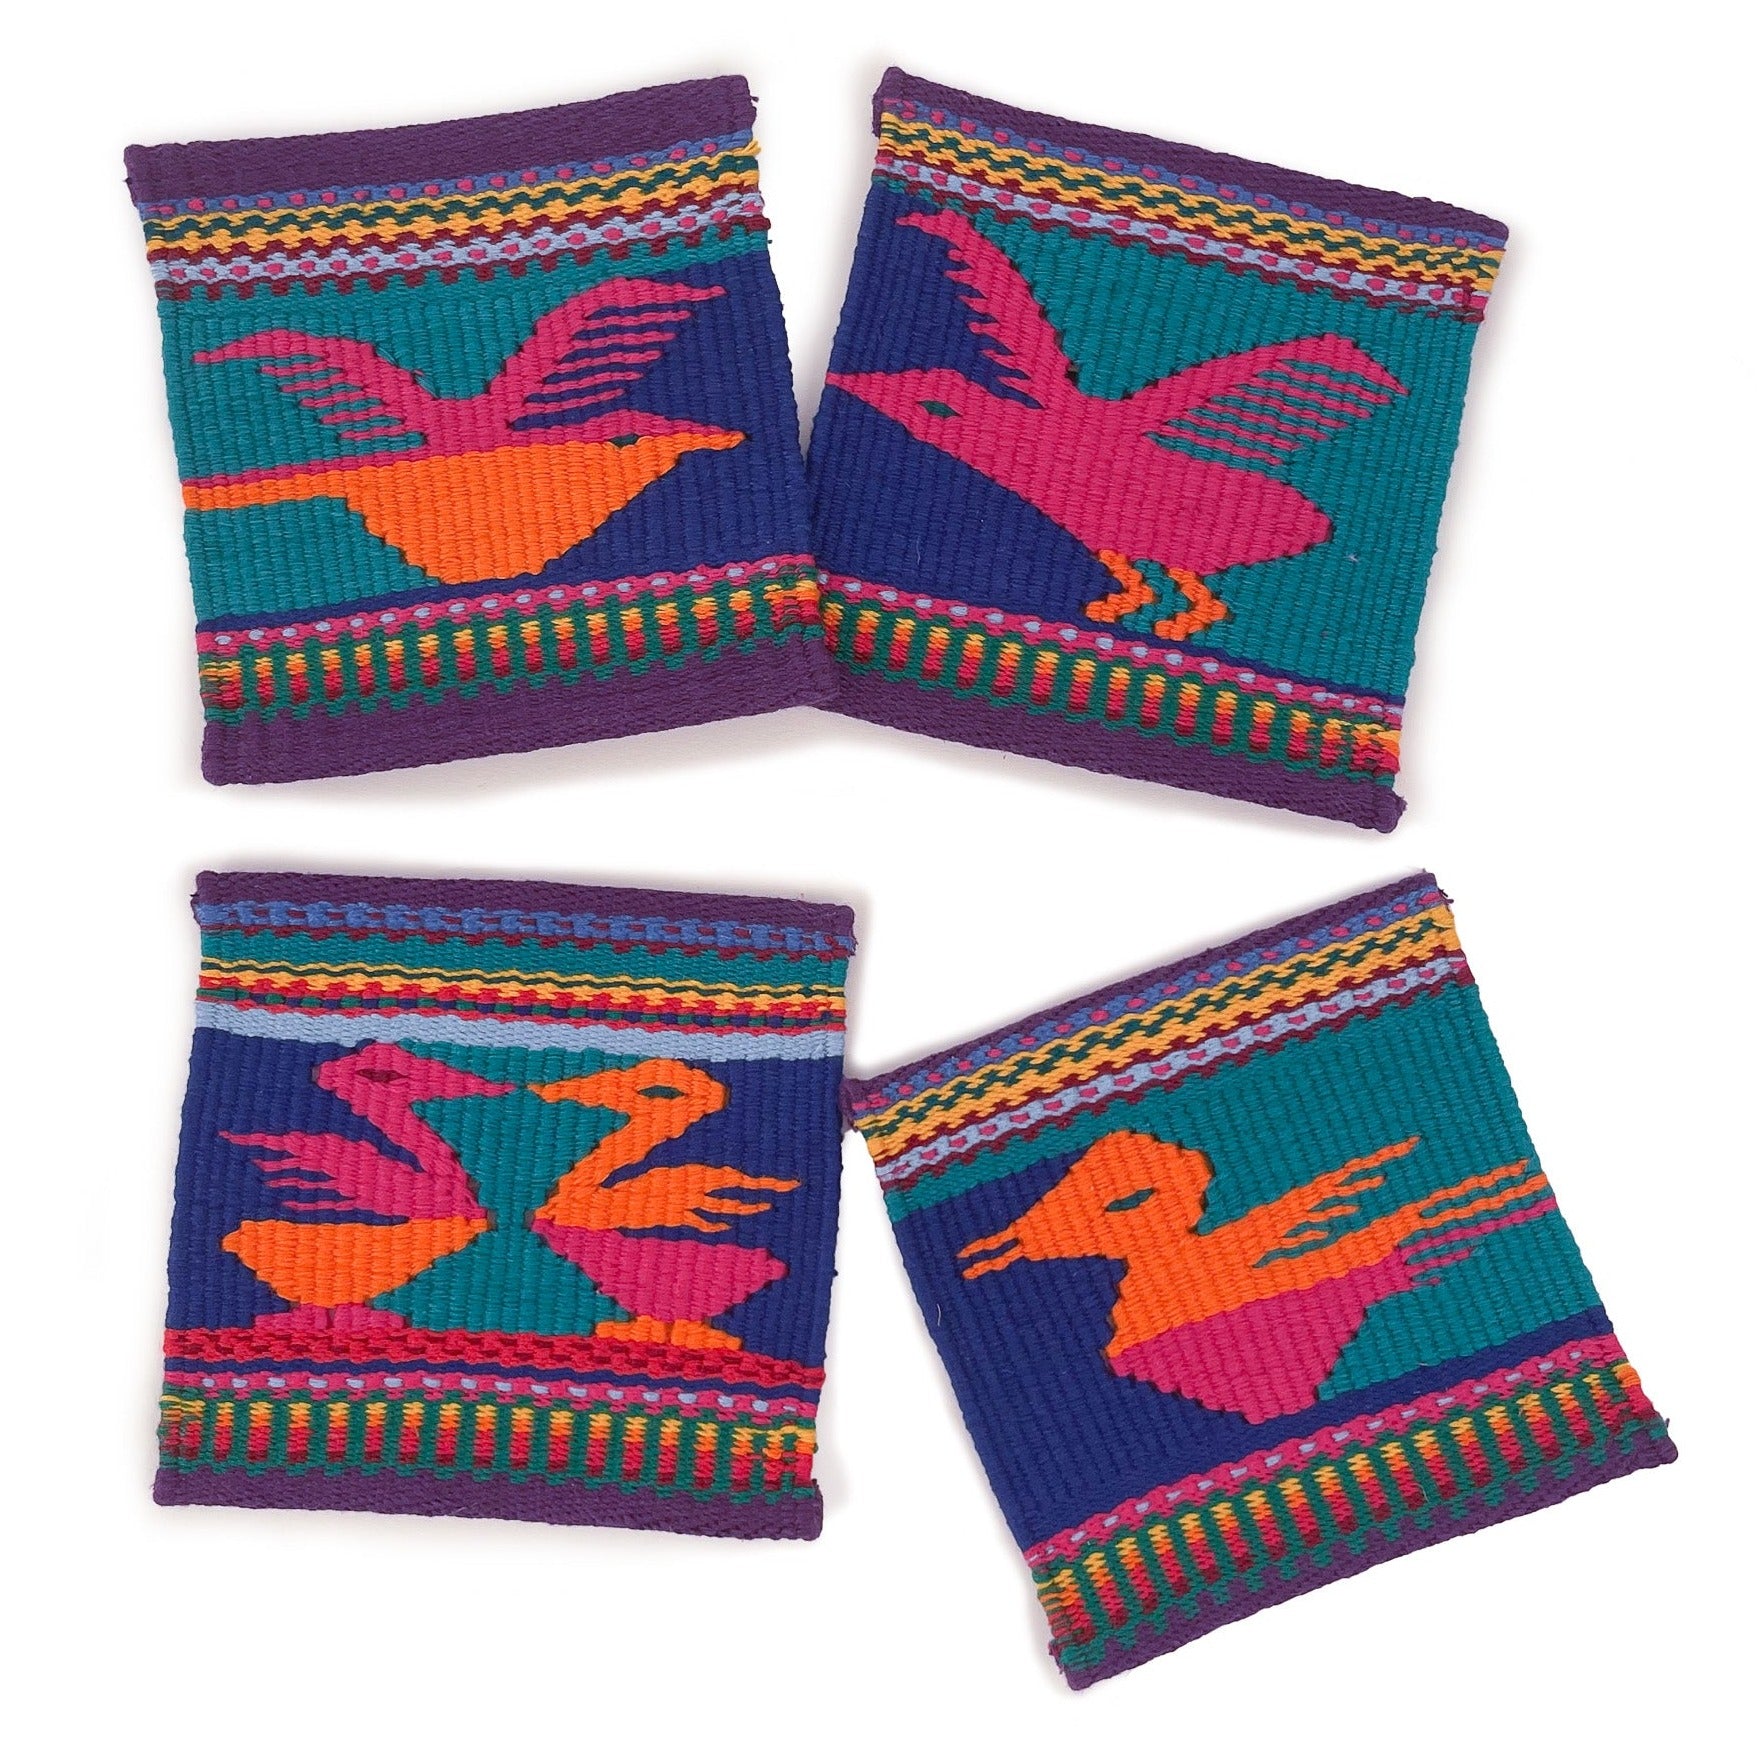 Set of 4 tapestry weave coasters on white background.  Each coaster features a bird or birds in different styles.